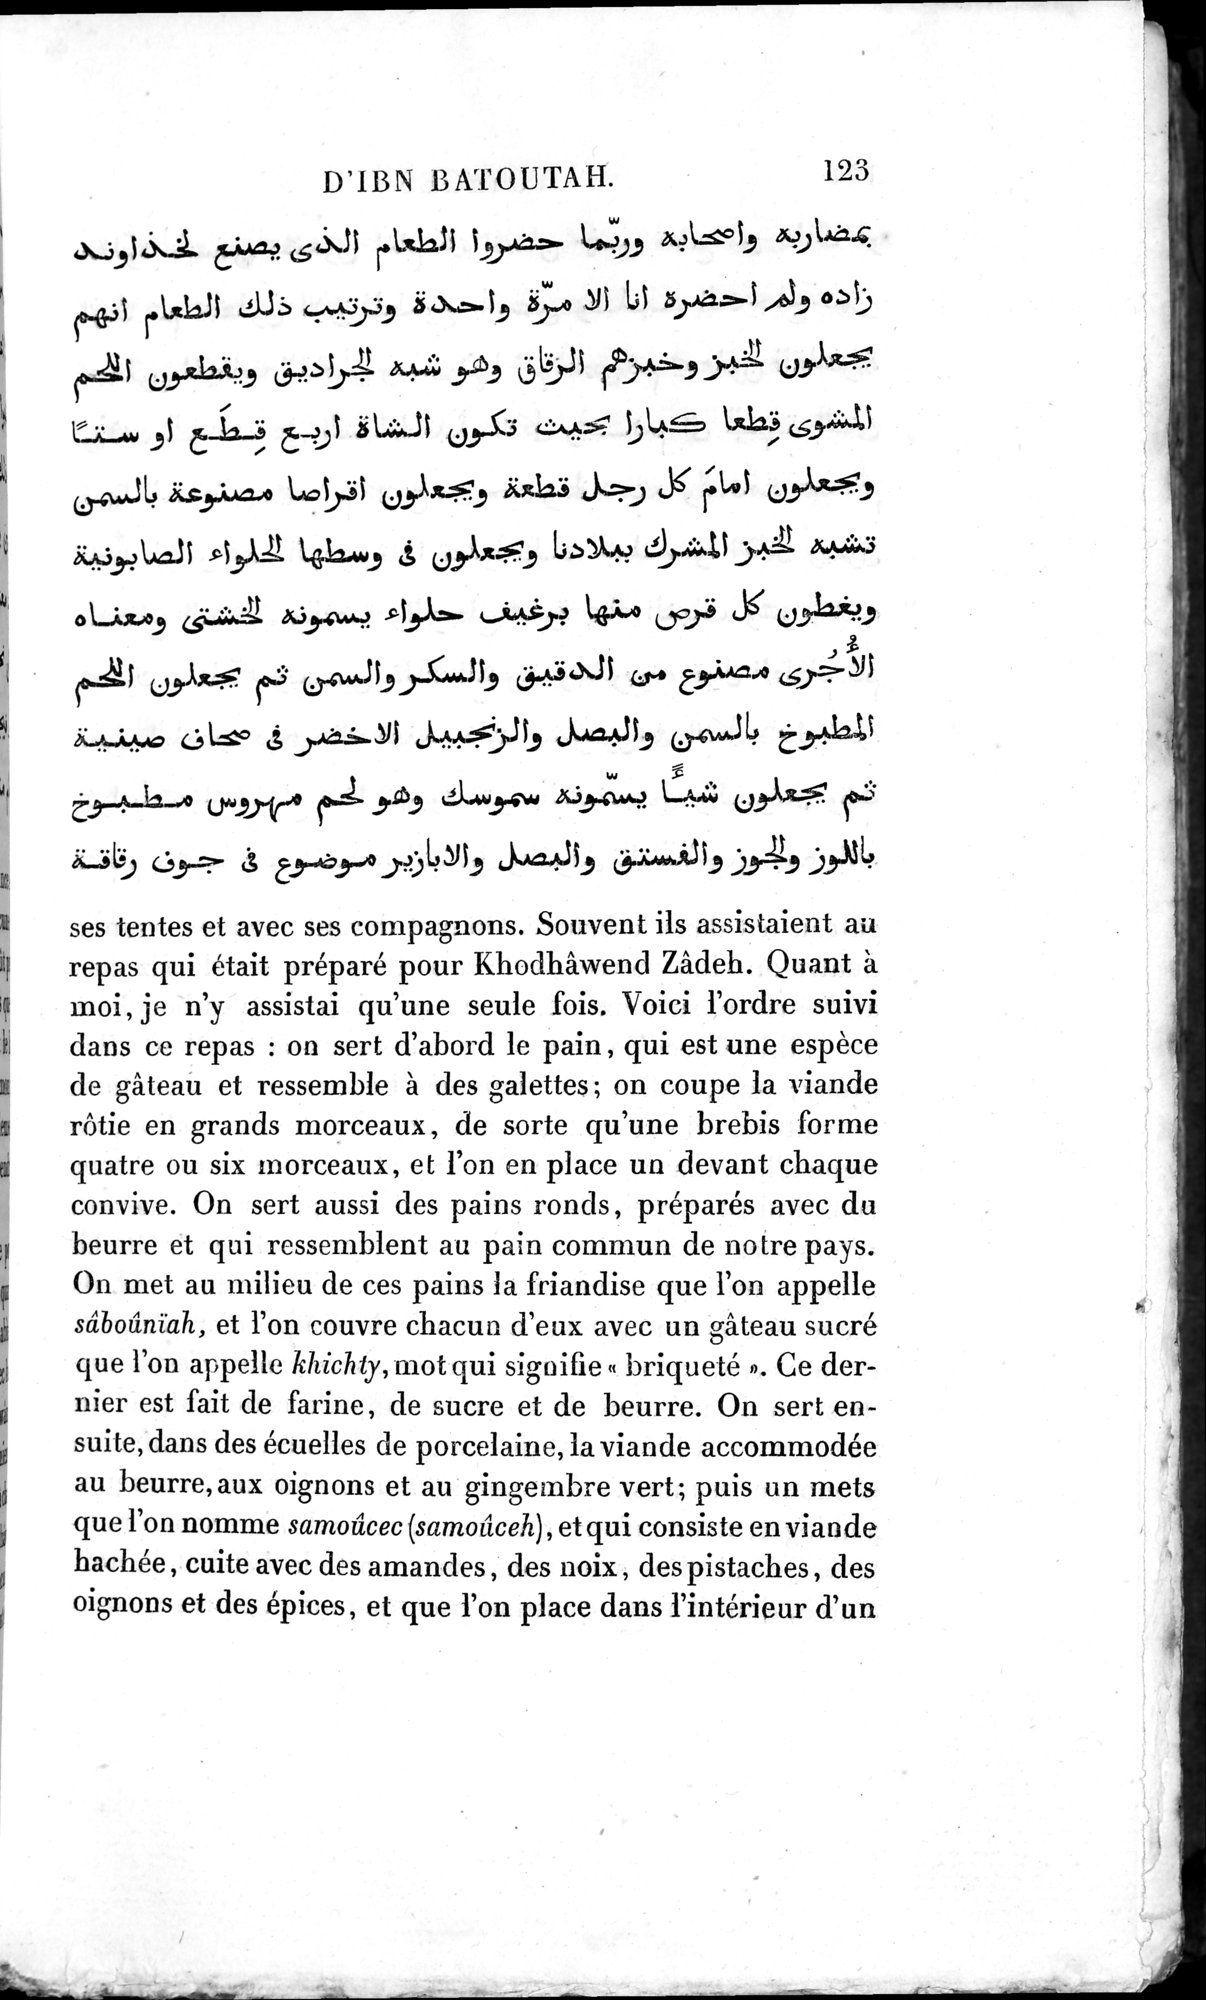 Voyages d'Ibn Batoutah : vol.3 / Page 163 (Grayscale High Resolution Image)